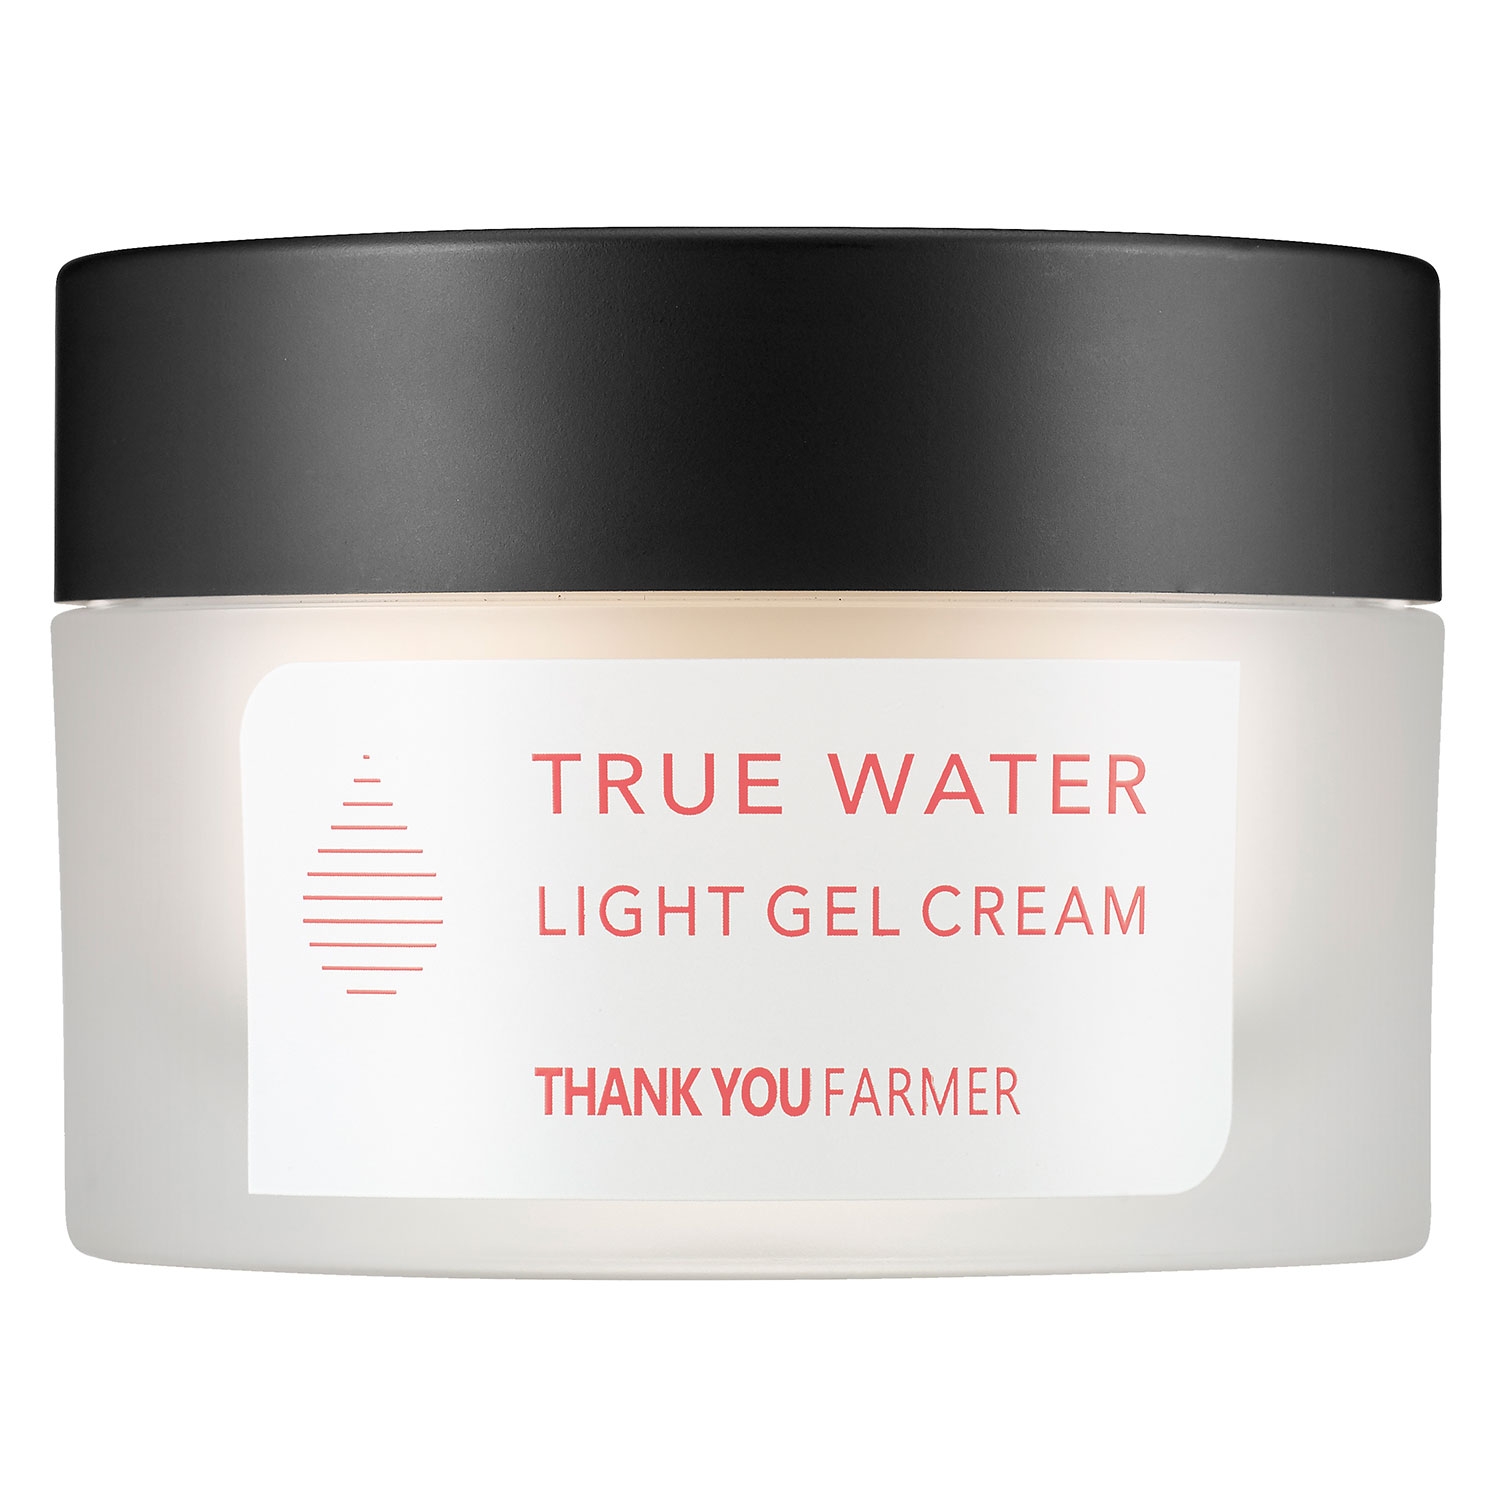 Product image from THANK YOU FARMER - True Water Light Gel Cream